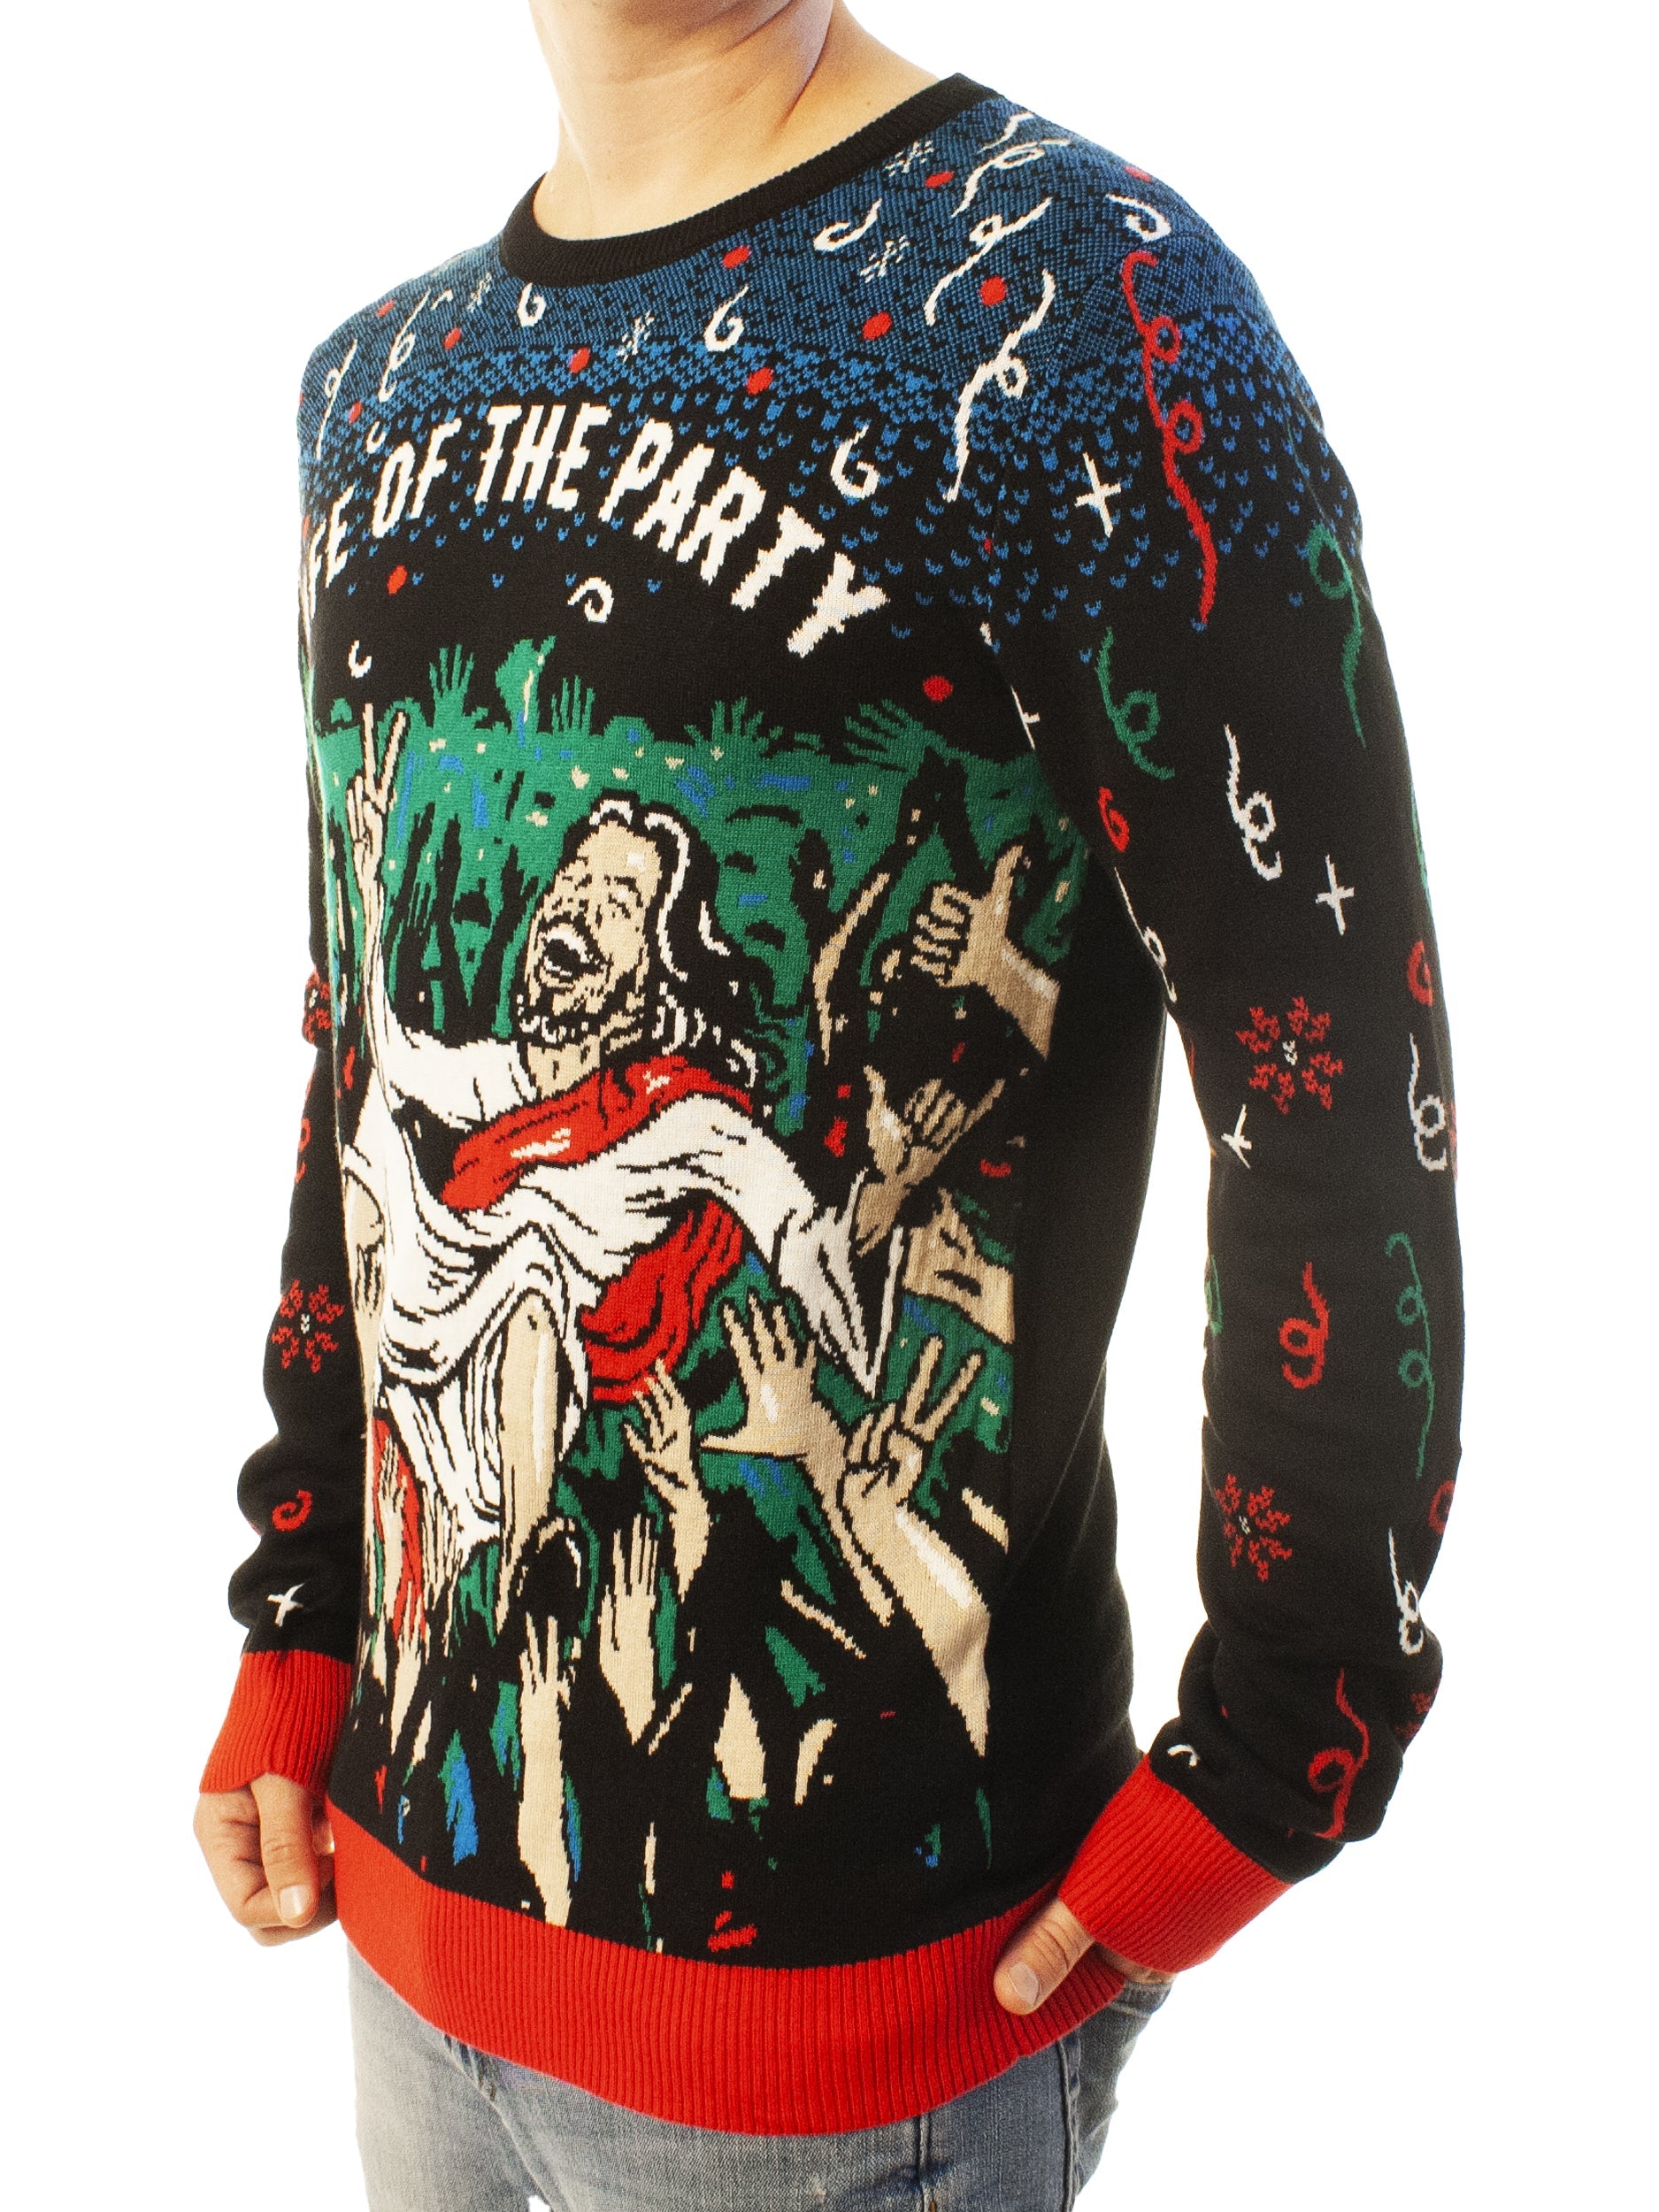 Life Of The Party Jesus Funny Ugly Christmas Sweater - Xmas Gifts For Him Or Her - Jesus Christ Sweater - God Gifts Idea